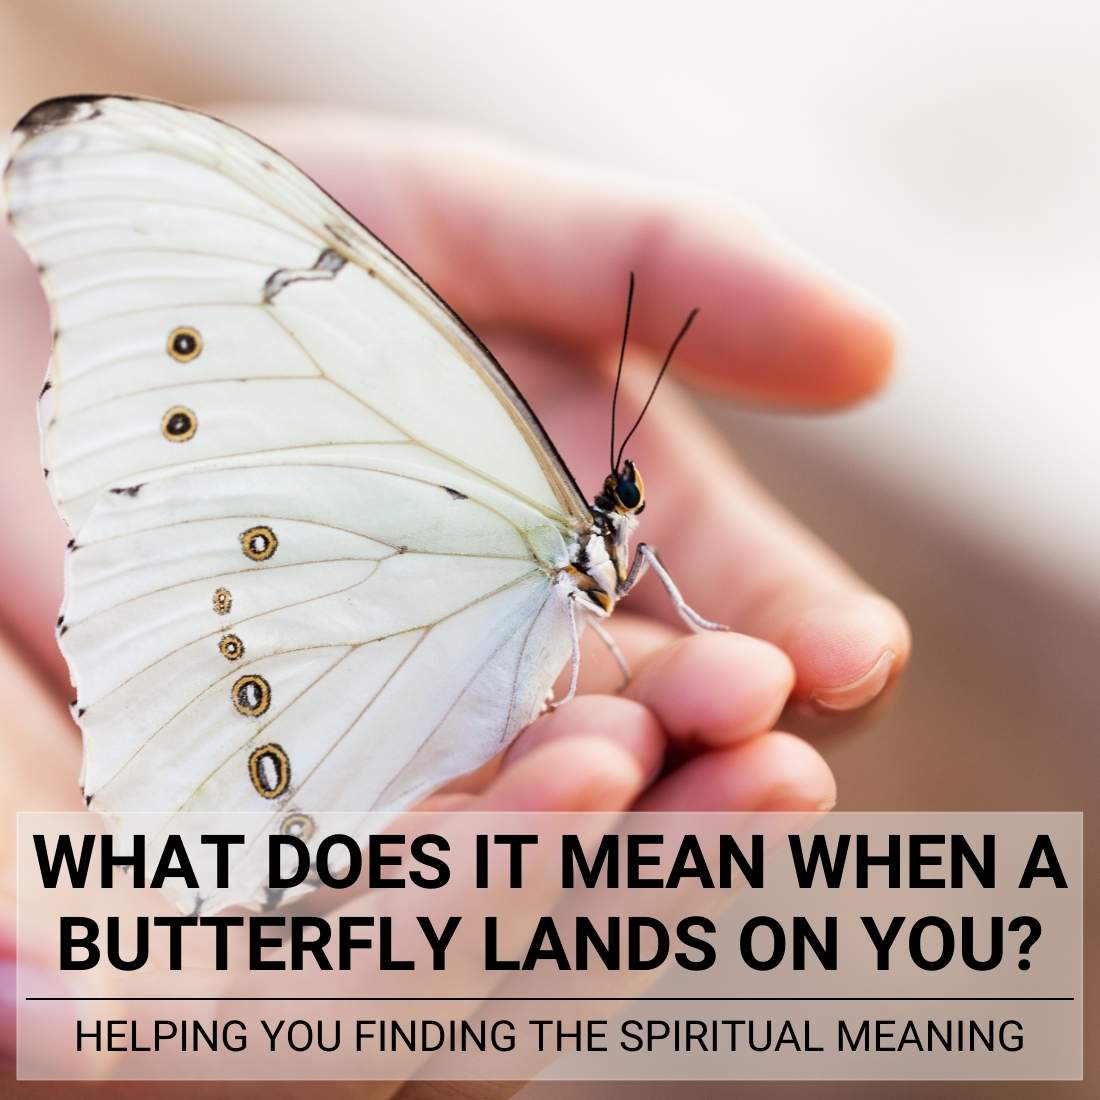 What Does it Mean When a Butterfly Lands On You